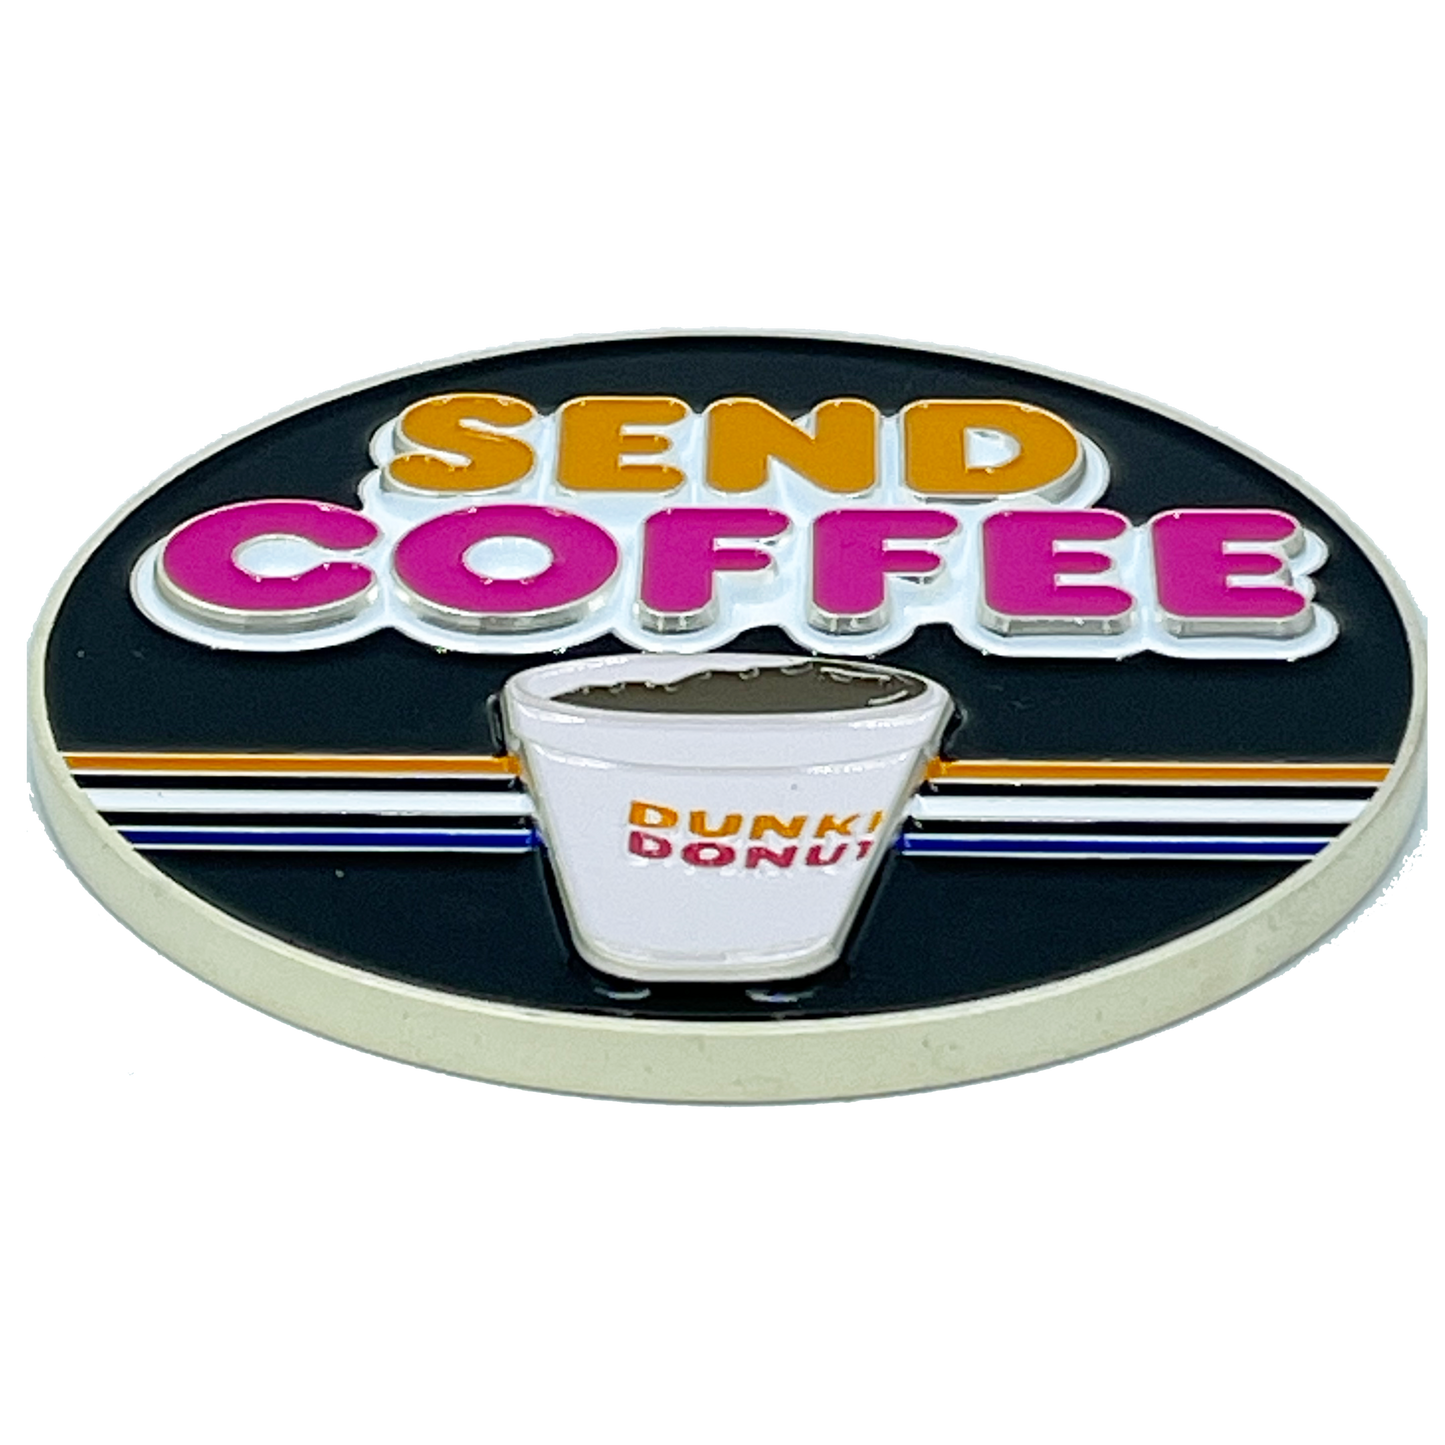 BL8-009 Send Coffee Donuts Police First Responders Dunkin inspired challenge coin Paramedic Firefighter Cops